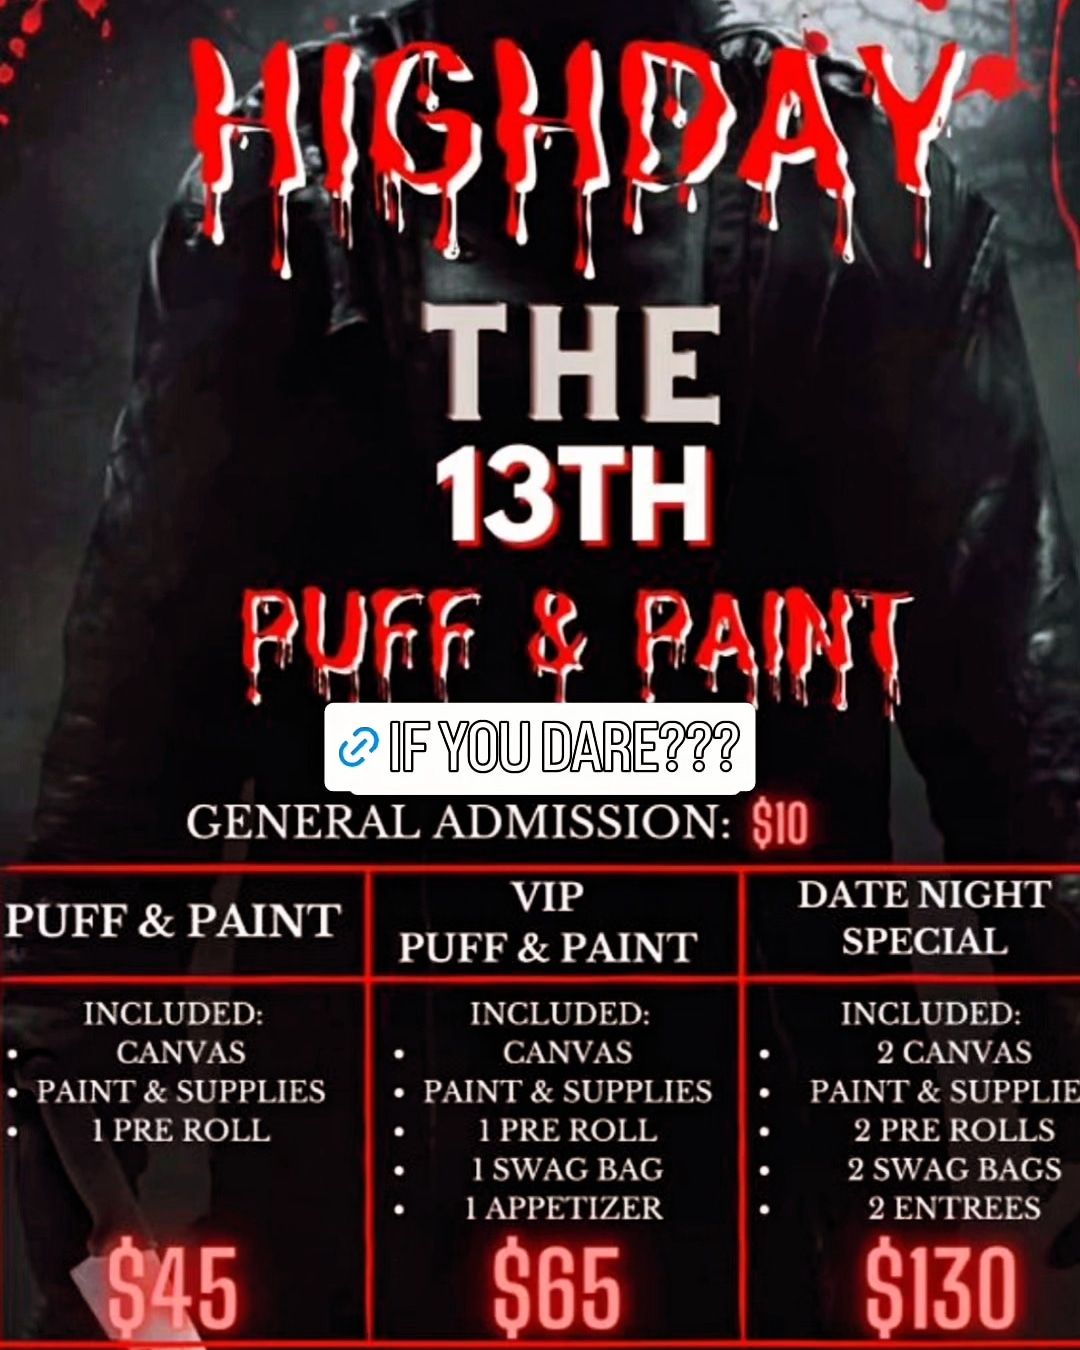 Puff & Paint - Highday the 13th - Copy cover image